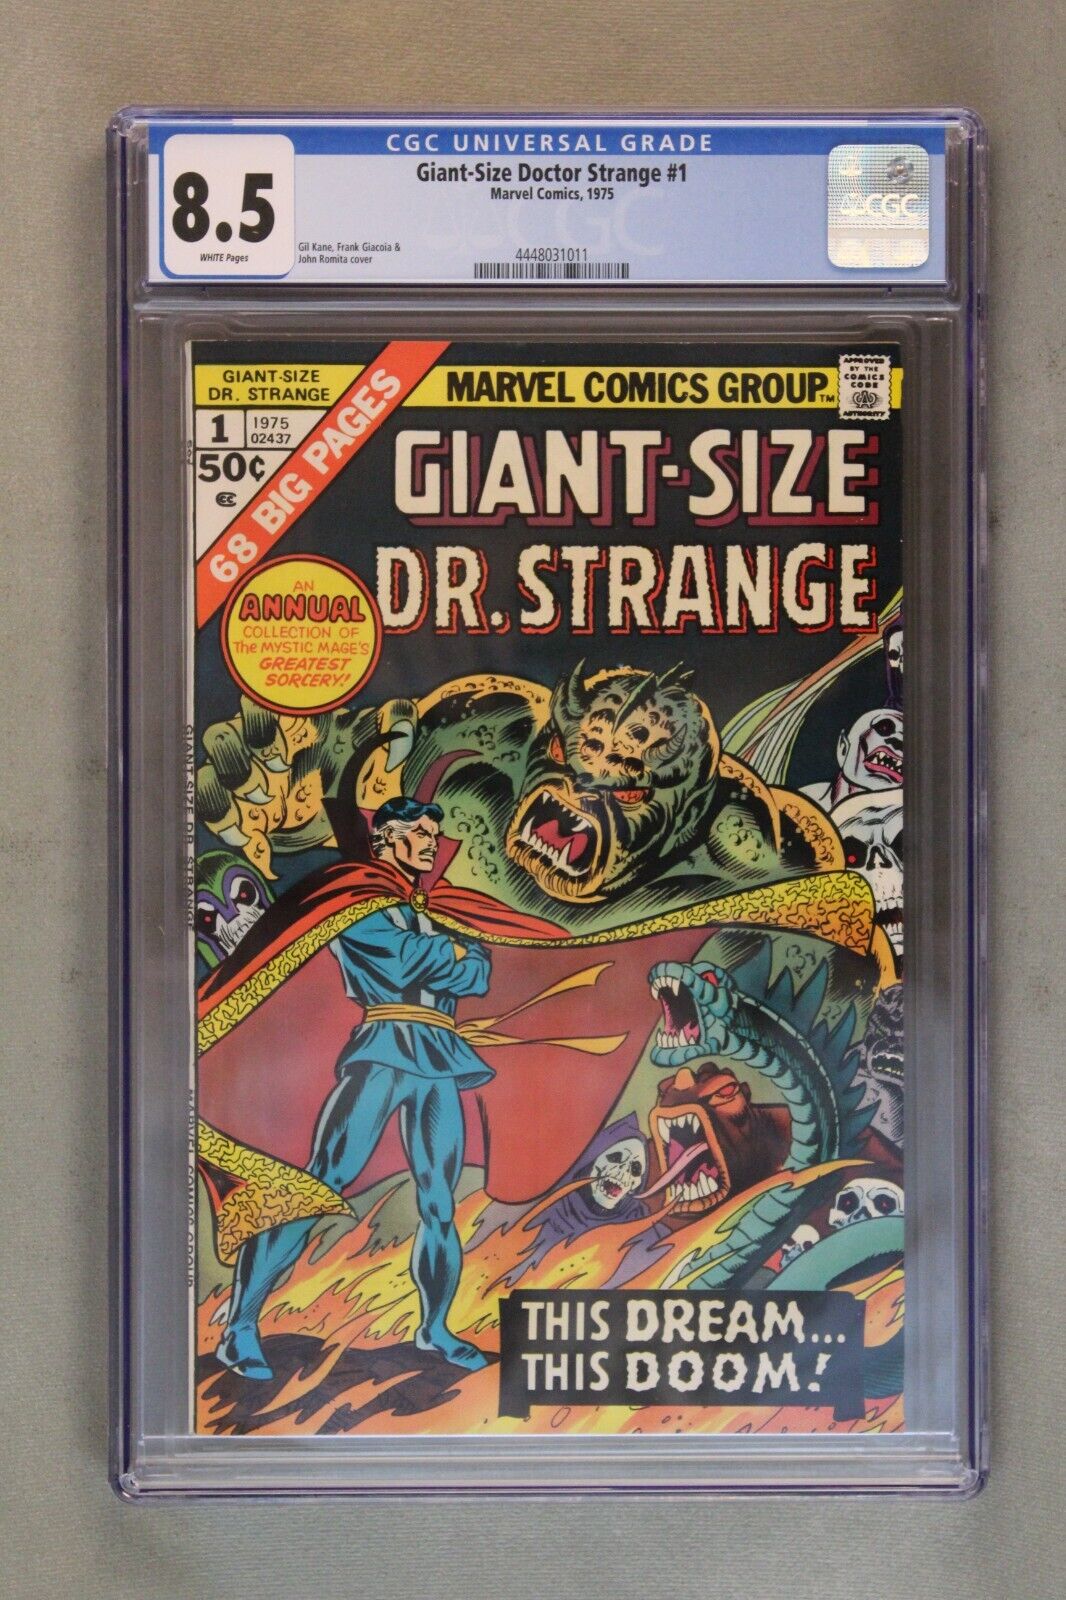 GIANT-SIZE DR. STRANGE #1 *1975* CGC Graded at 8.5, White Pages